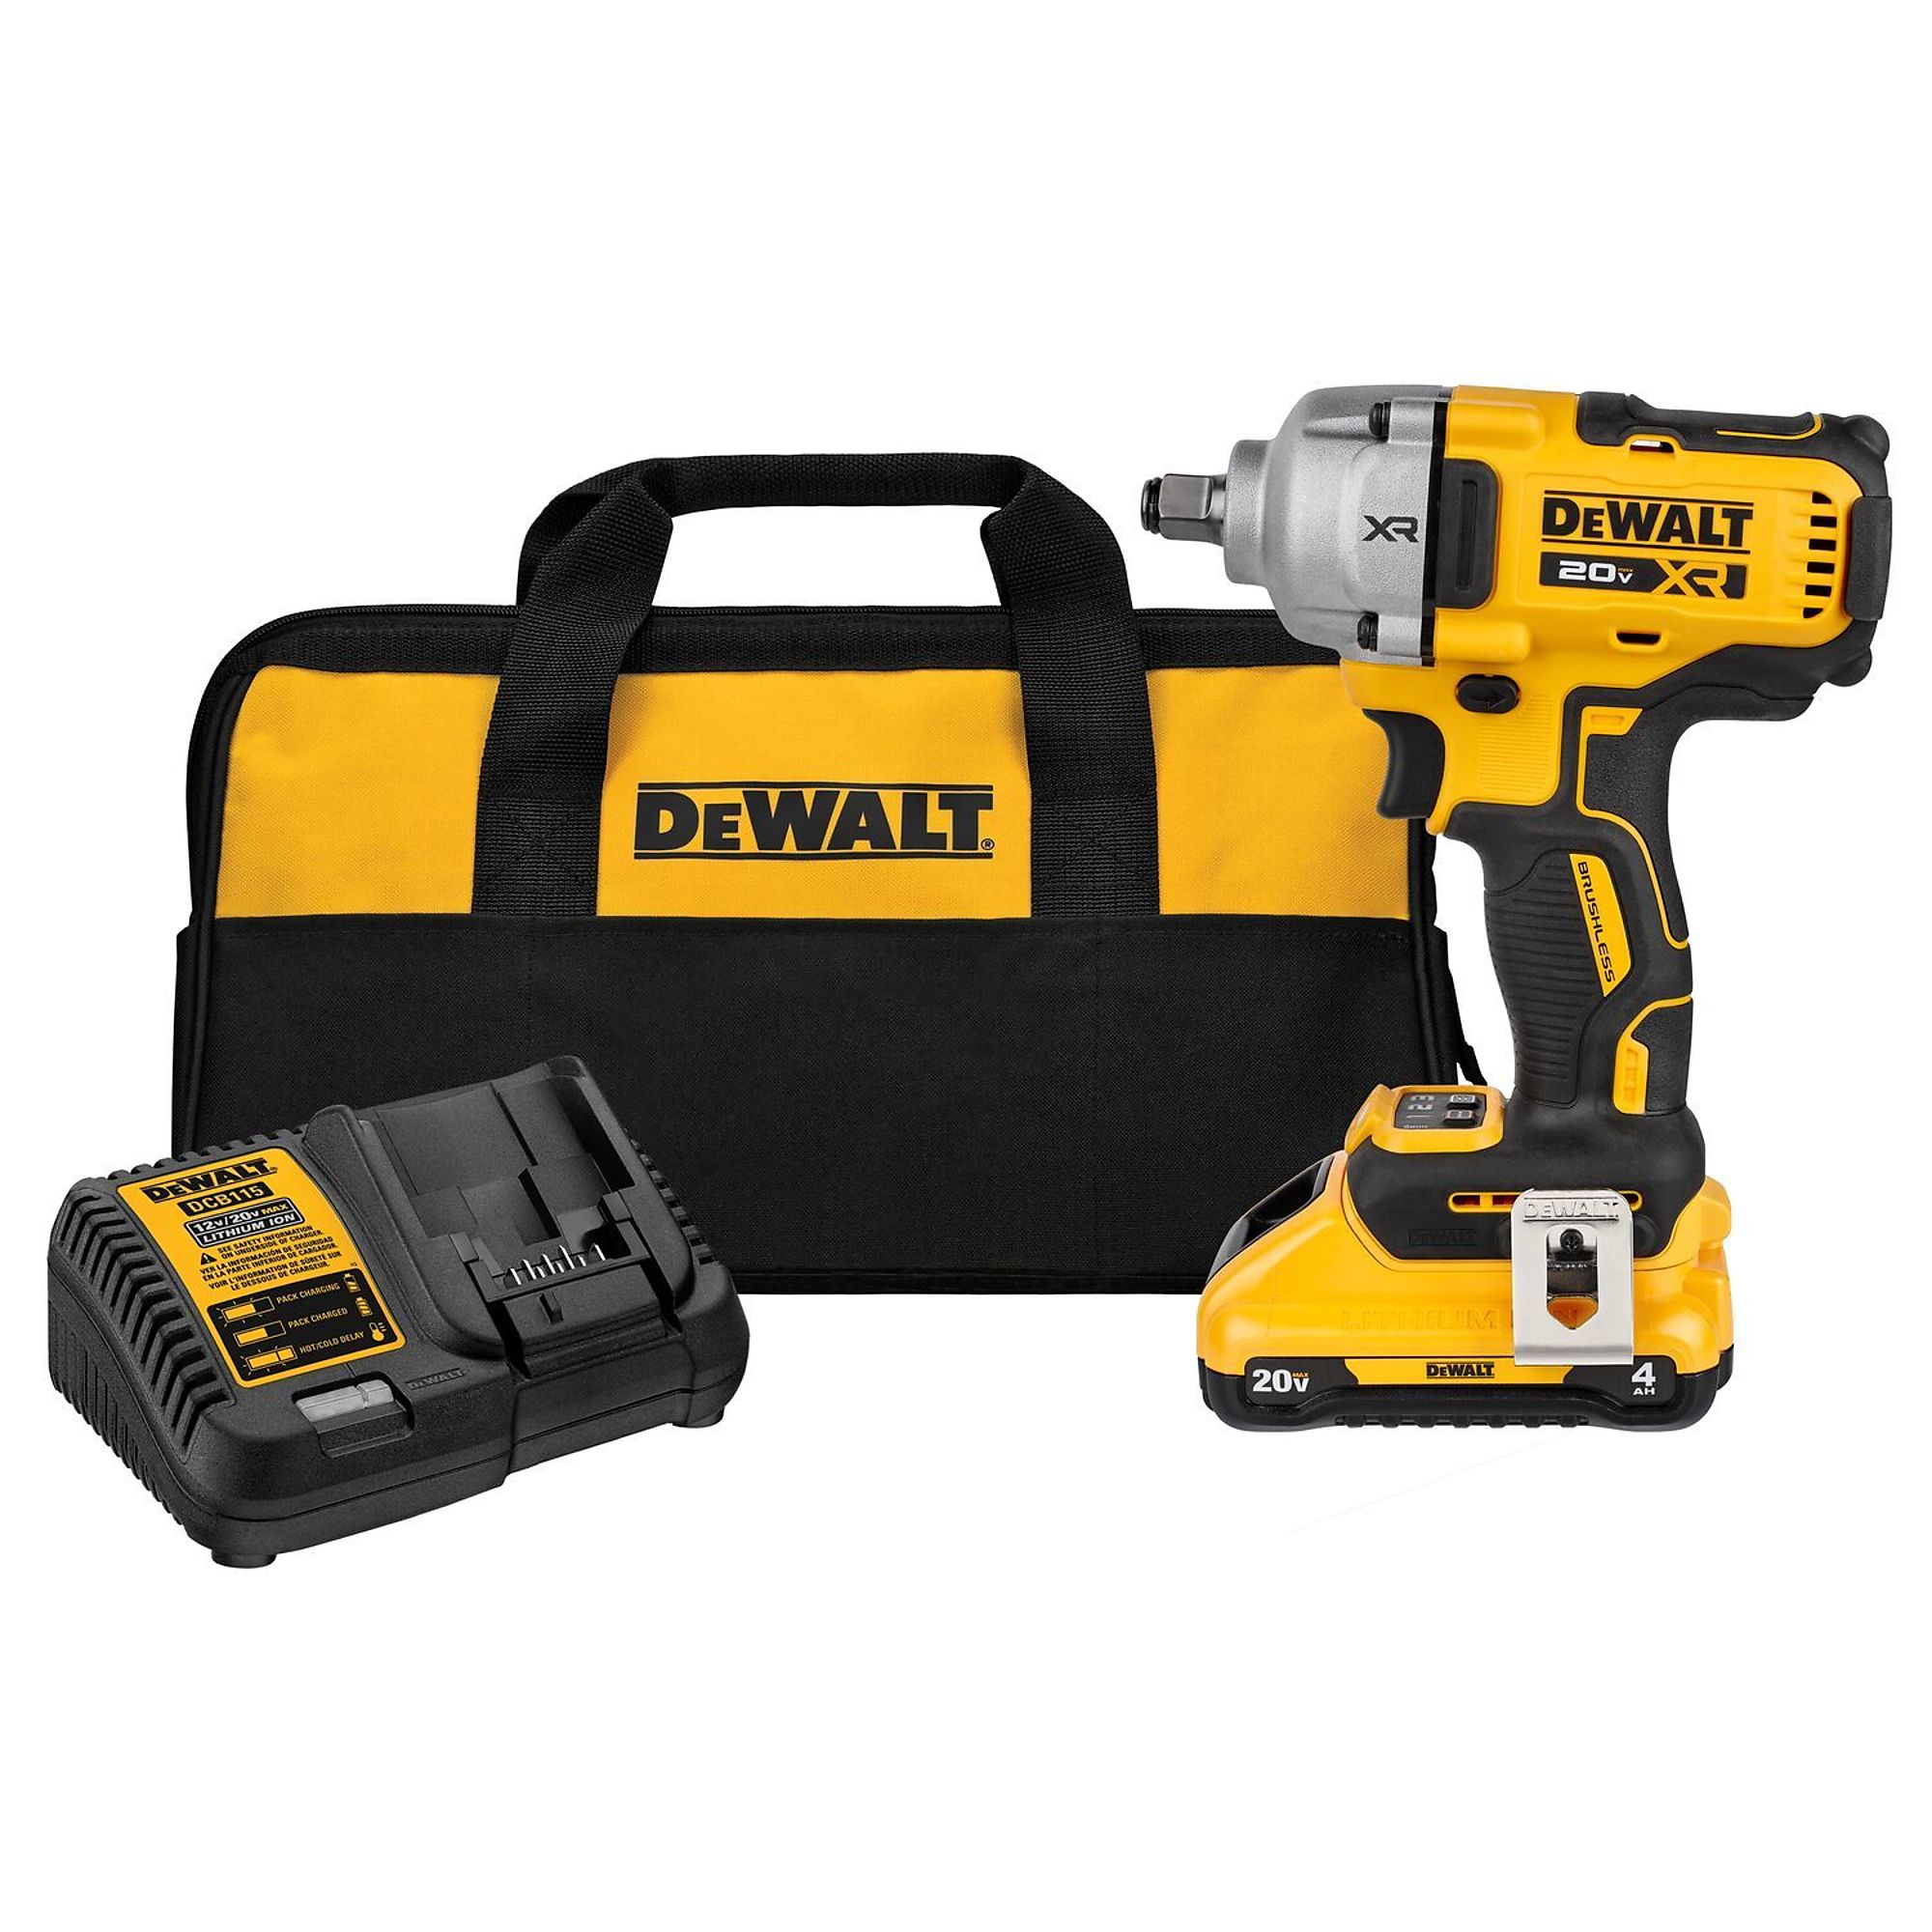 DEWALT, 20V MAX* XR 1/2Inch Mid-Range Impact Wrench Kit, Drive Size 1/2 in, Volts 20, Battery Type Lithium-ion, Model DCF891Q1